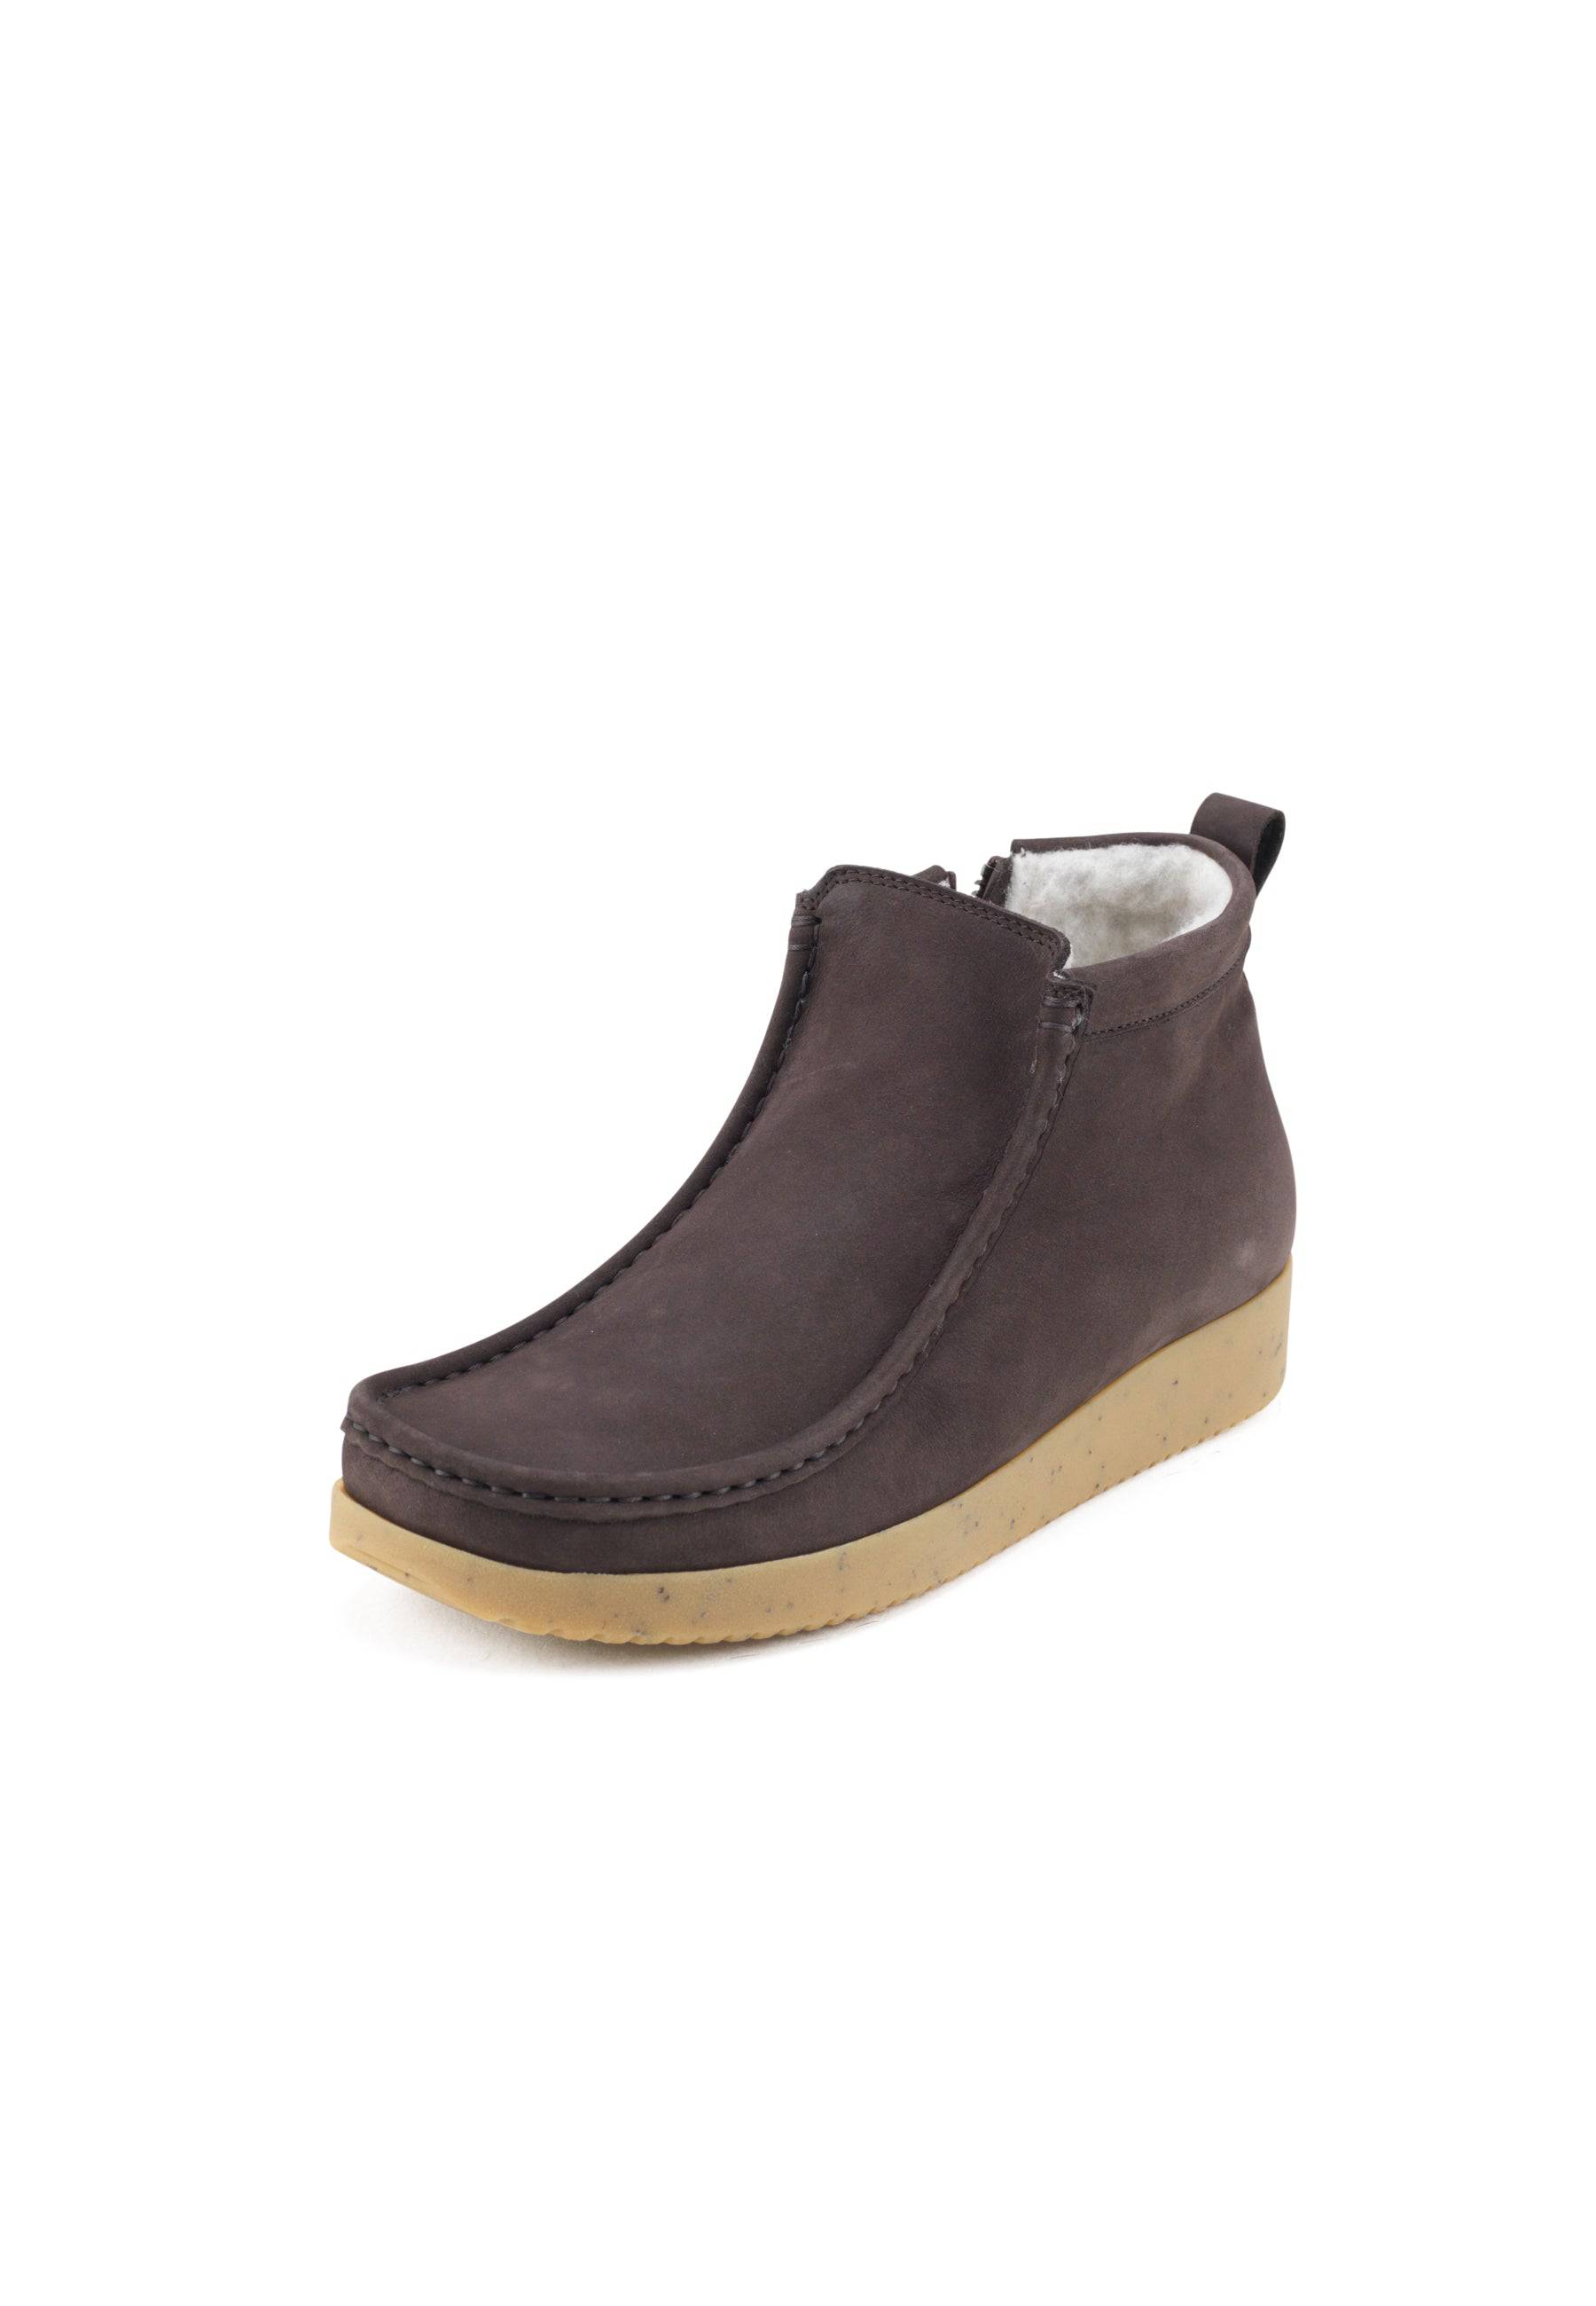 Sofia Warm lined boot Oily Nubuck - Bison